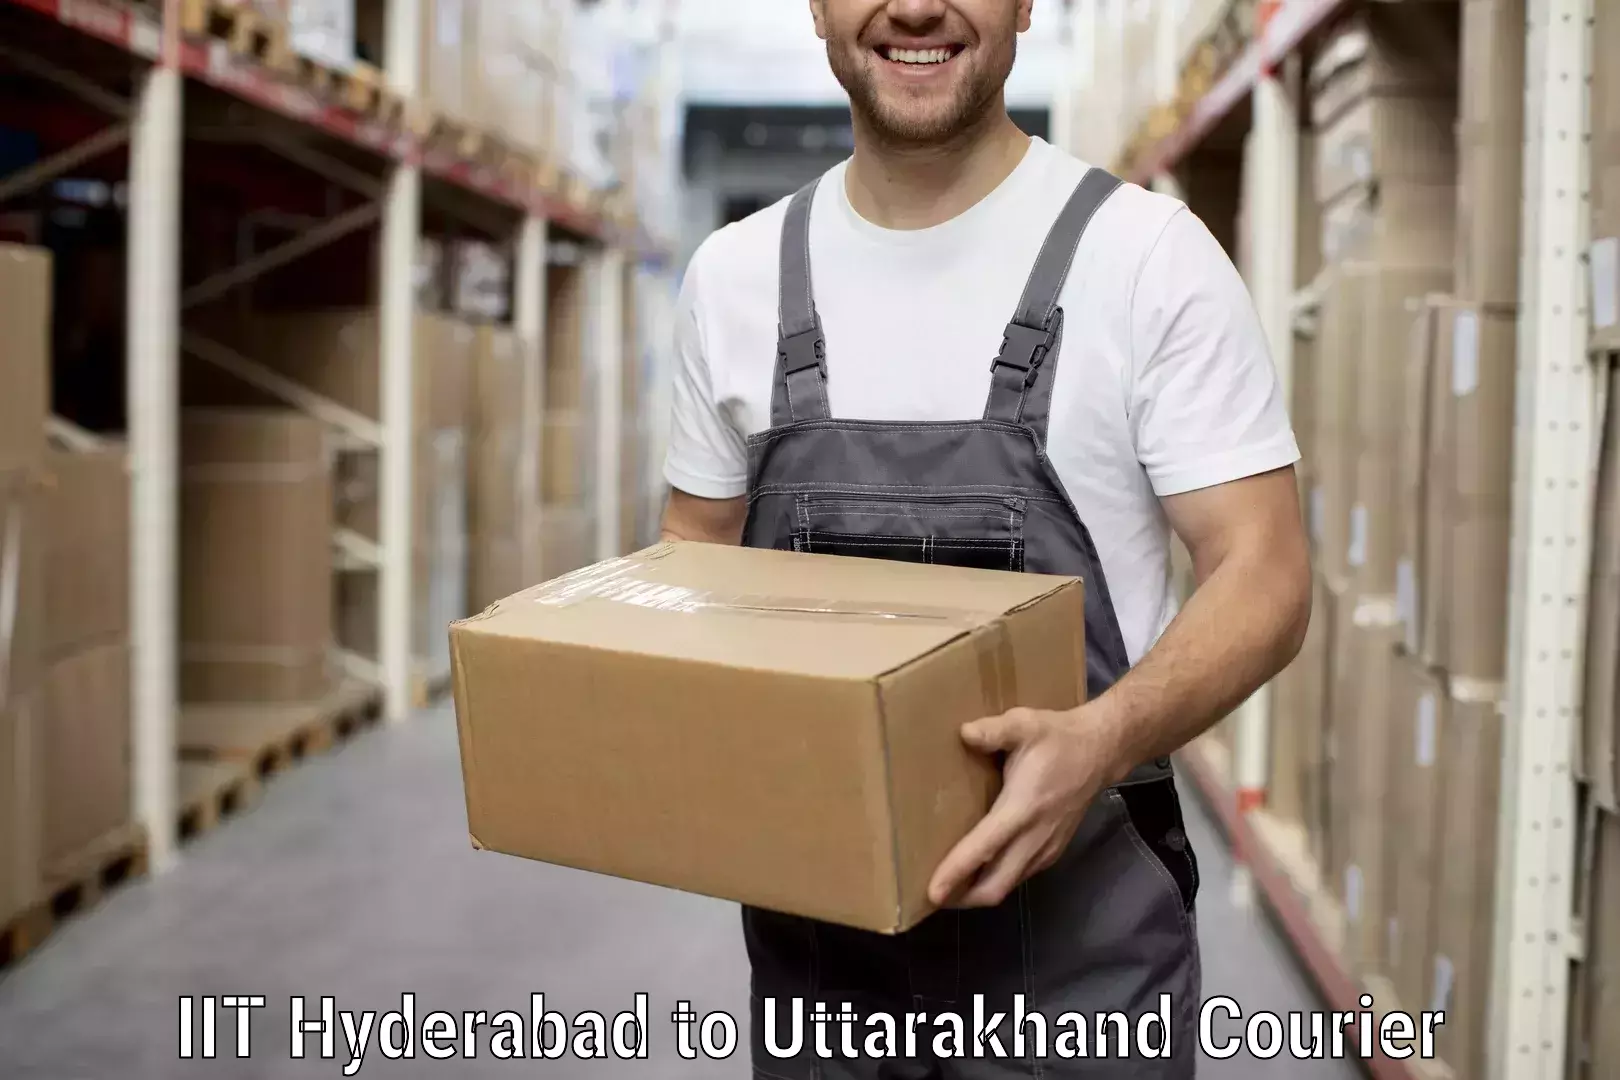 Professional relocation services IIT Hyderabad to Uttarakhand